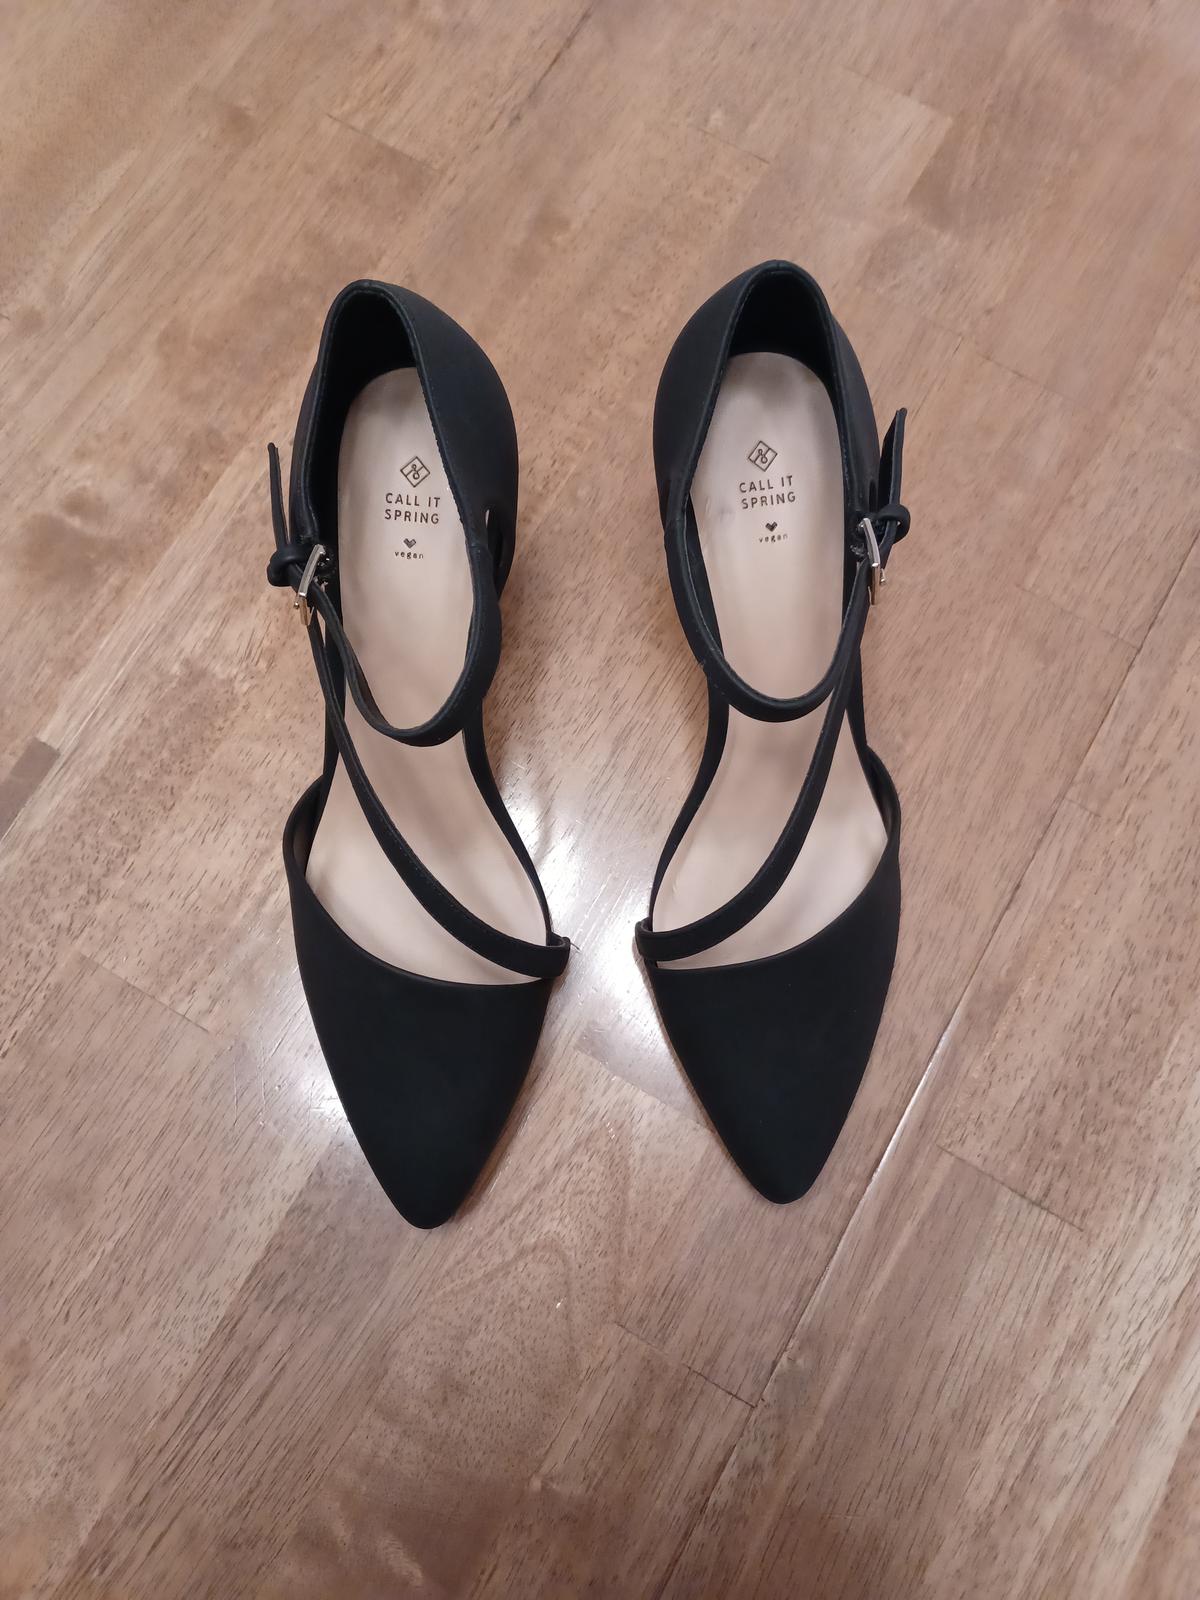 Photo of Chaussures talons hauts NEUVES 